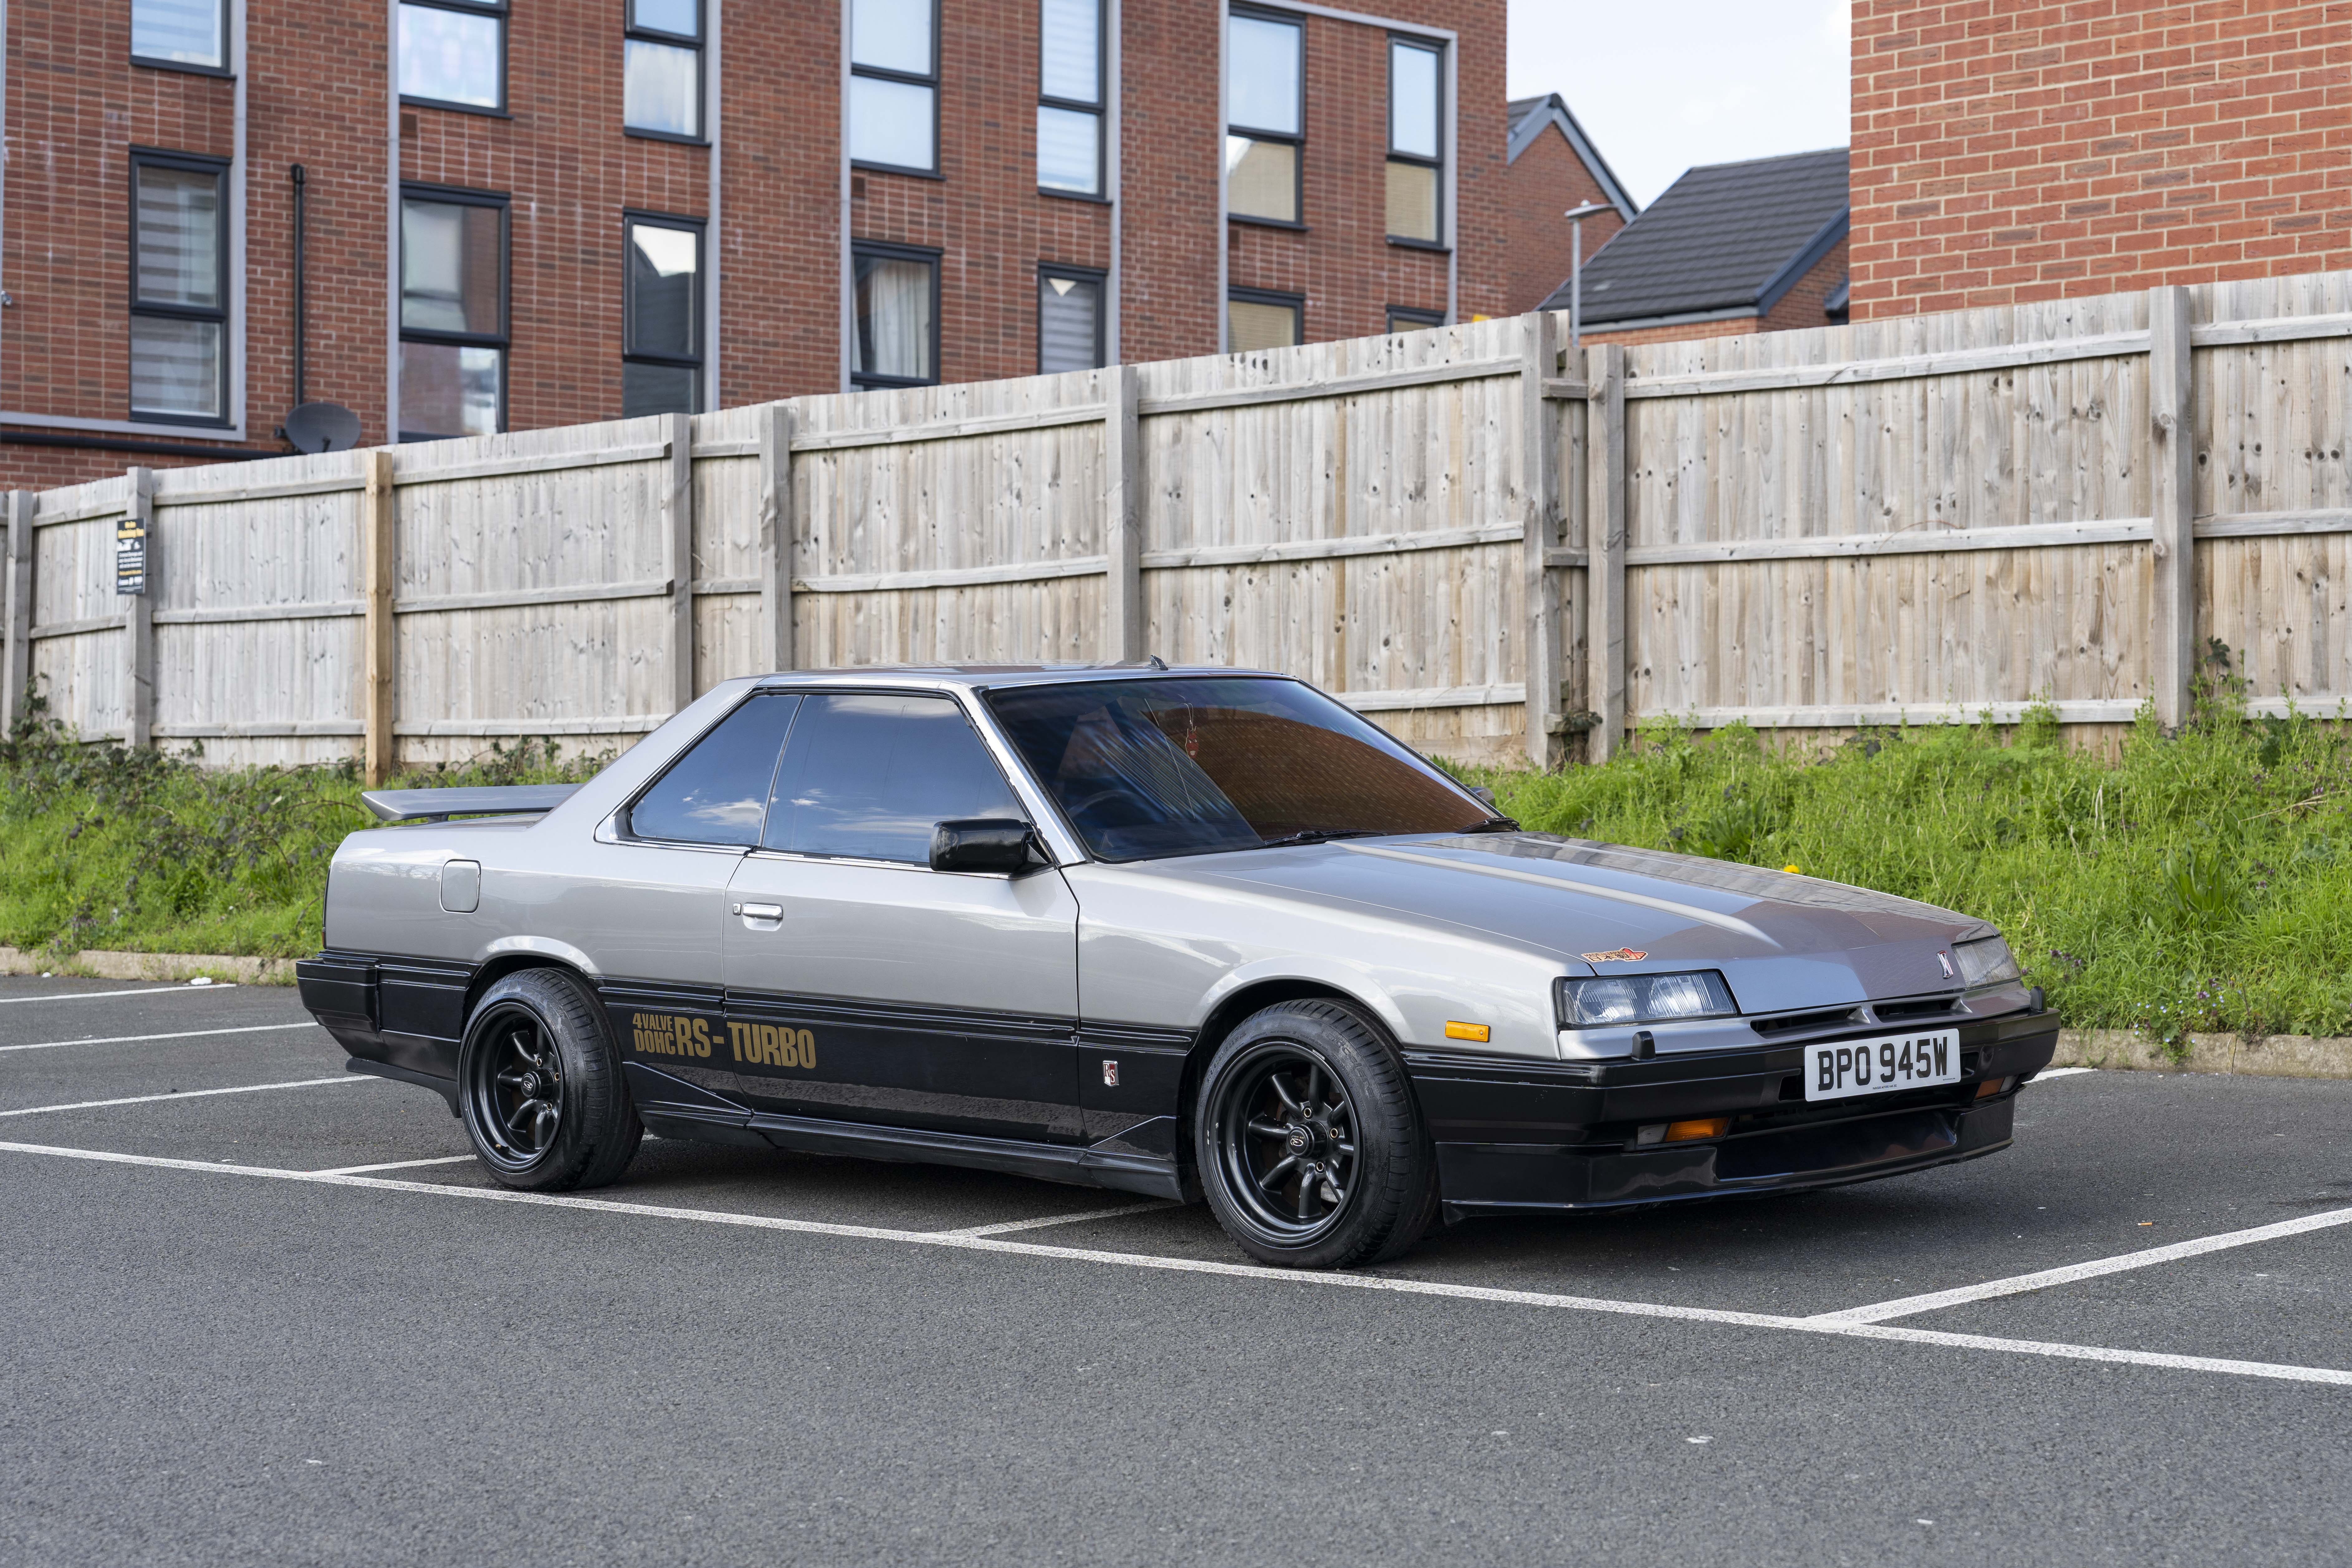 1981 NISSAN SKYLINE (DR30) RS-X TURBO for sale by auction in 